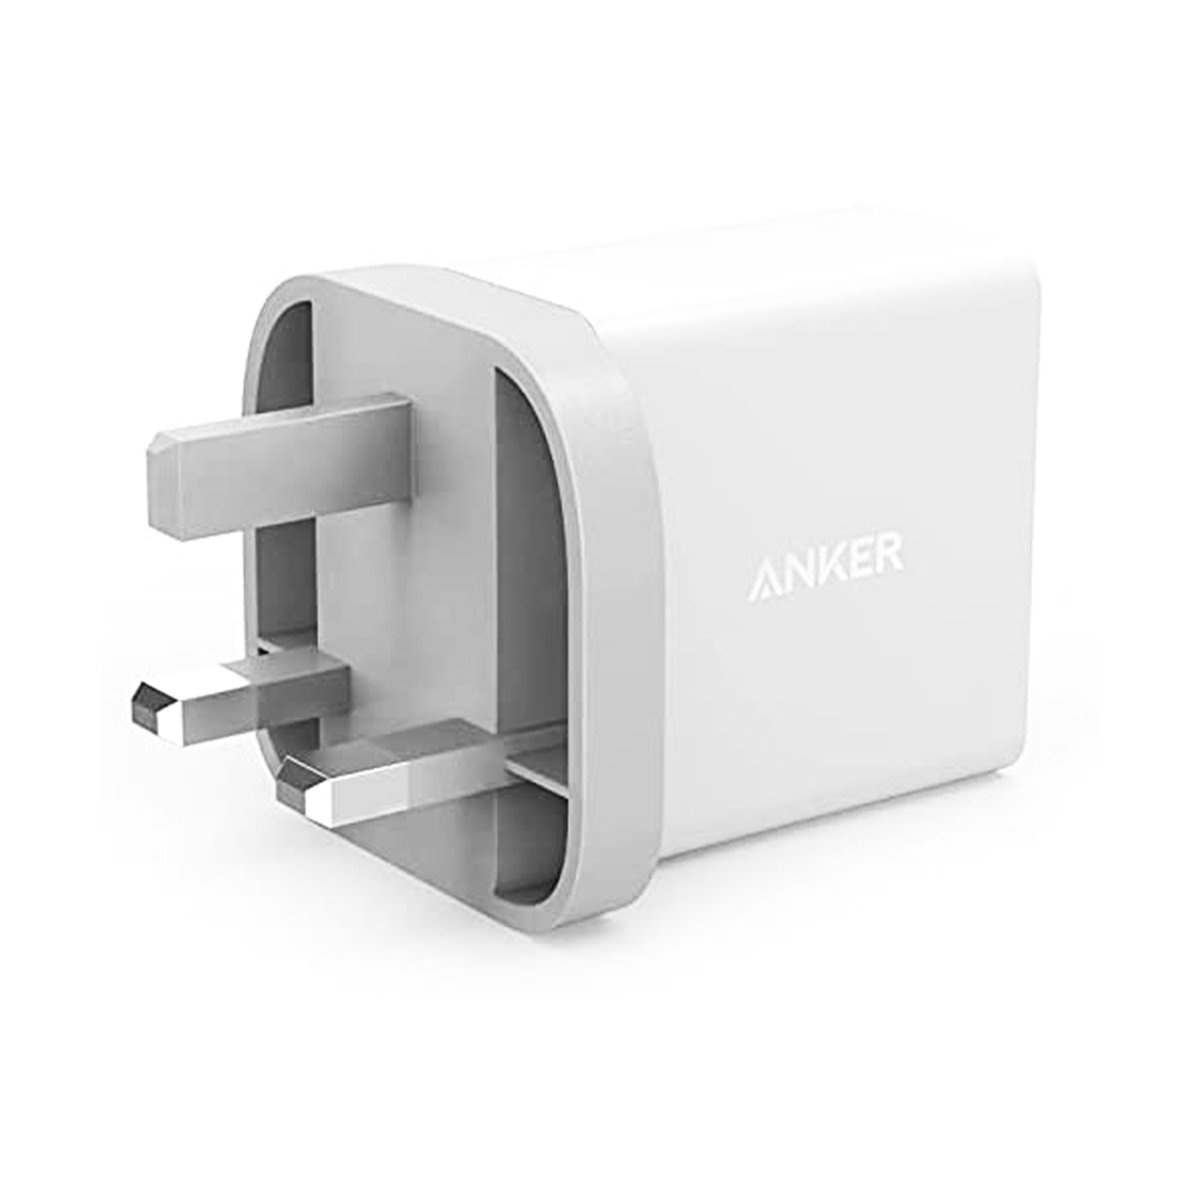 Anker 2-Port USB Charger A2021K21 24W